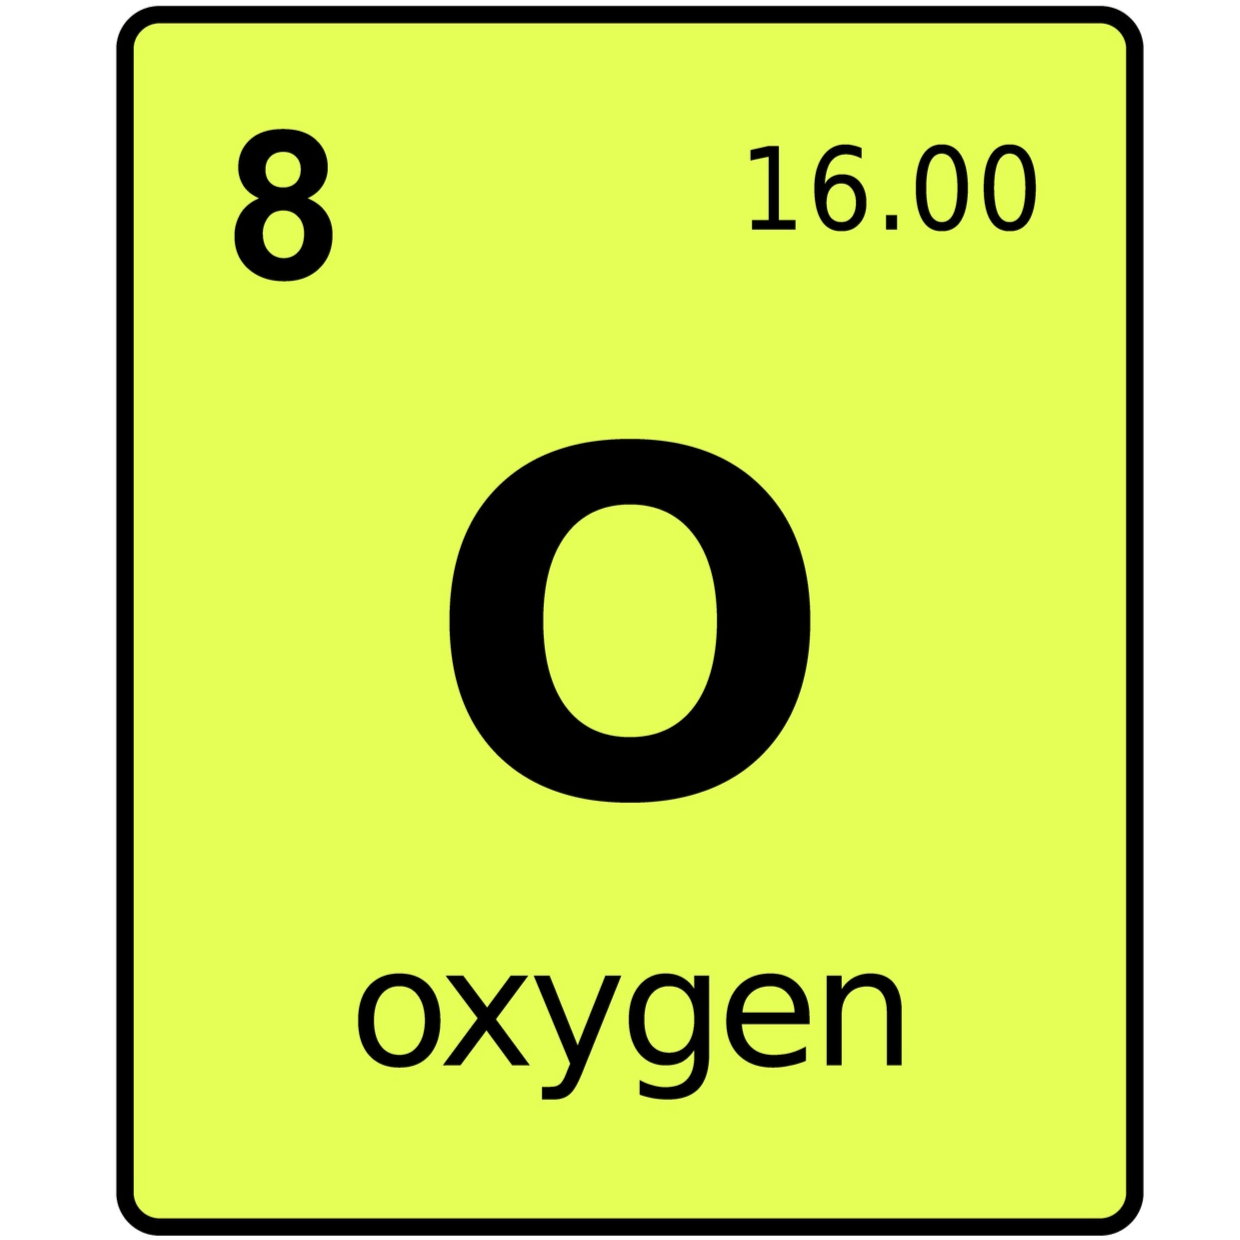 22 Oxygen Facts for Kids, Students and Teachers